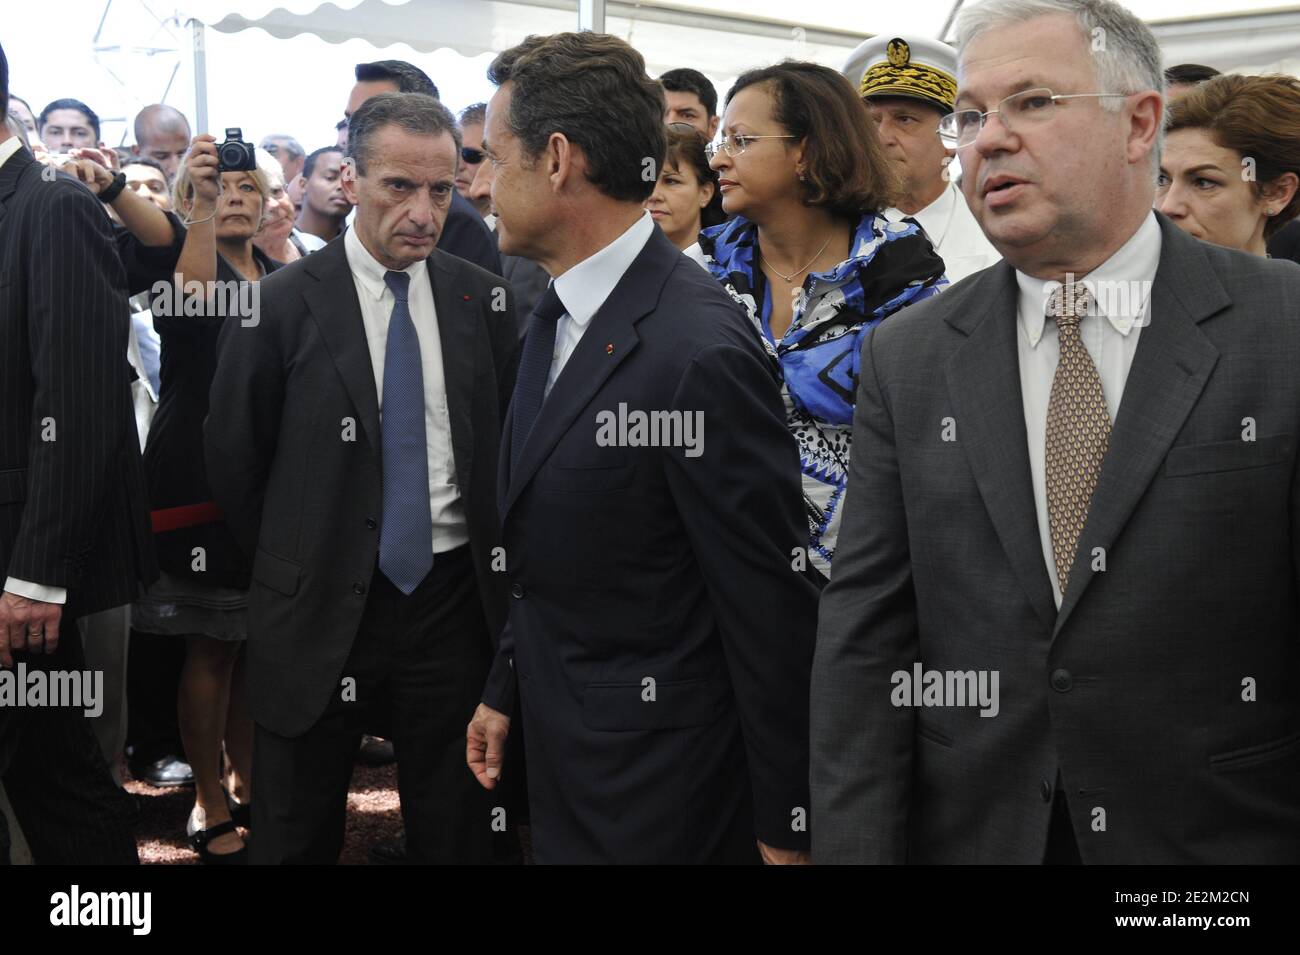 French President Nicolas Sarkozy (C) alongside President of French energy giant EDF (Electricite de France) Henri Proglio (L) tours the AKUO photovoltaic site in Saint-Pierre, French overseas department La Reunion, on January 19, 2010, during his official two-day trip to the Indian Ocean. Photo by Elodie Gregoire/ABACAPRESS.COM Stock Photo